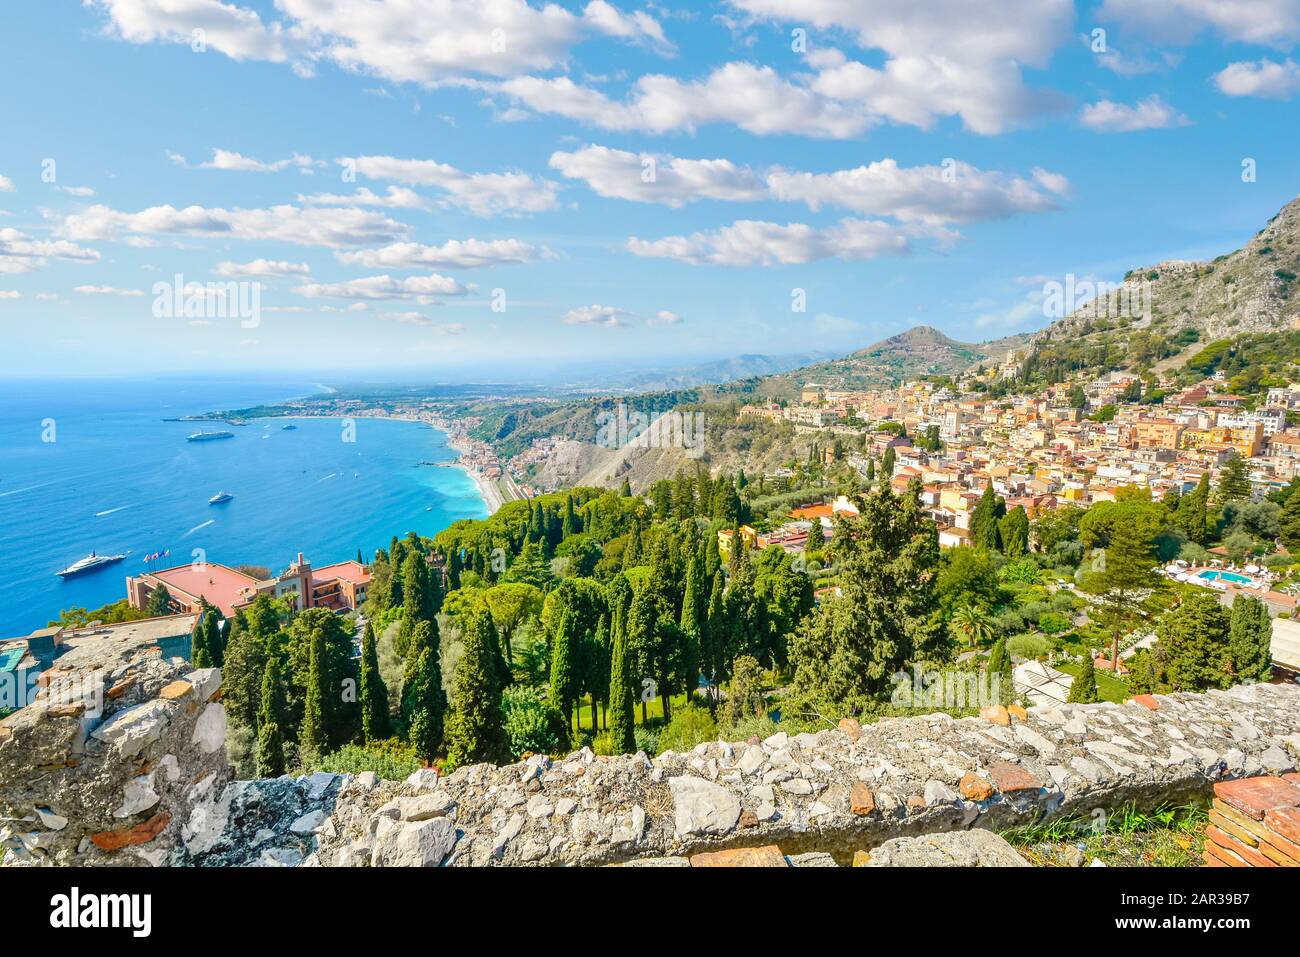 Looking down from the ancient Greek Theatre at Taormina, Italy, on the Italian island of Sicily, with boats and resorts dotting the Mediterranean sea Stock Photo